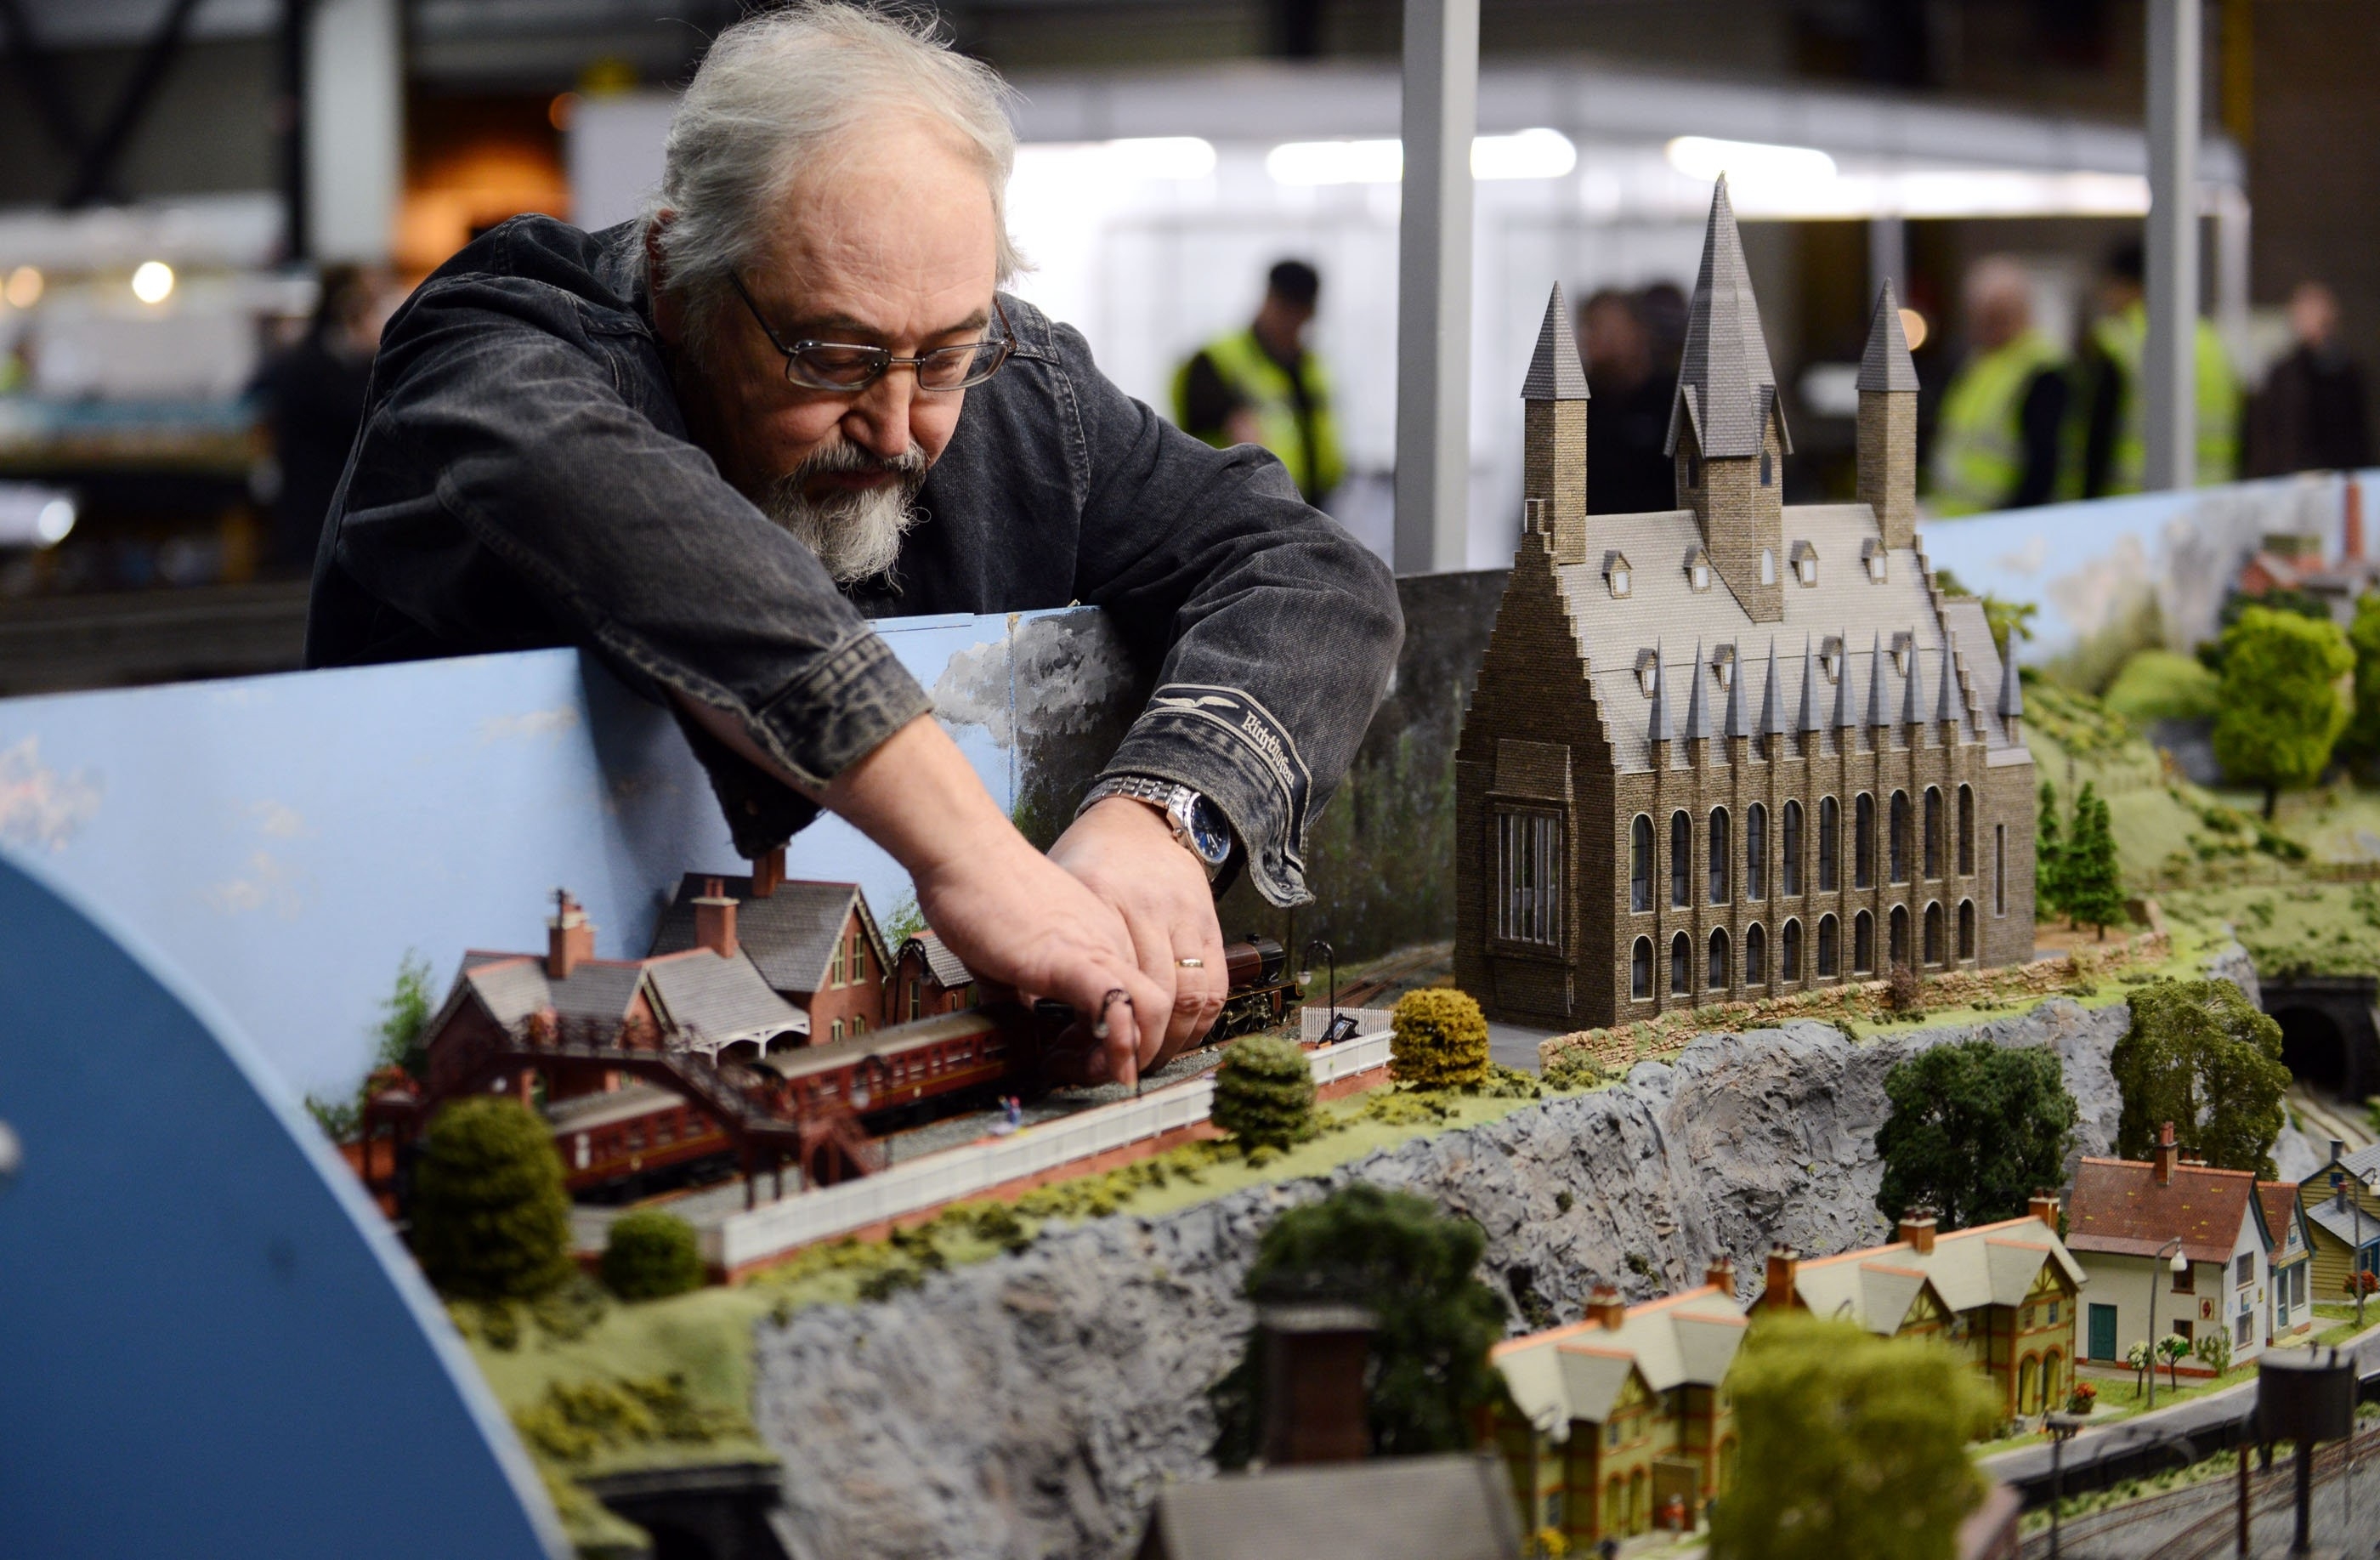 Sandy Oliphant gets his layout ready, a model of the railway stations from Thomas the Tank Engine, Hogwarts Express from Harry Potter and Underground Ernie, ahead of the 50th annual gathering of model railway enthusiasts displaying at Glasgow's SECC from tomorrow, Friday 26th to Sunday 28th Febuary, where 30 different clubs from across the UK and further are expected to display. See Centre Press story CPRAIL; Thousands of model railway enthusiasts gather for convention.